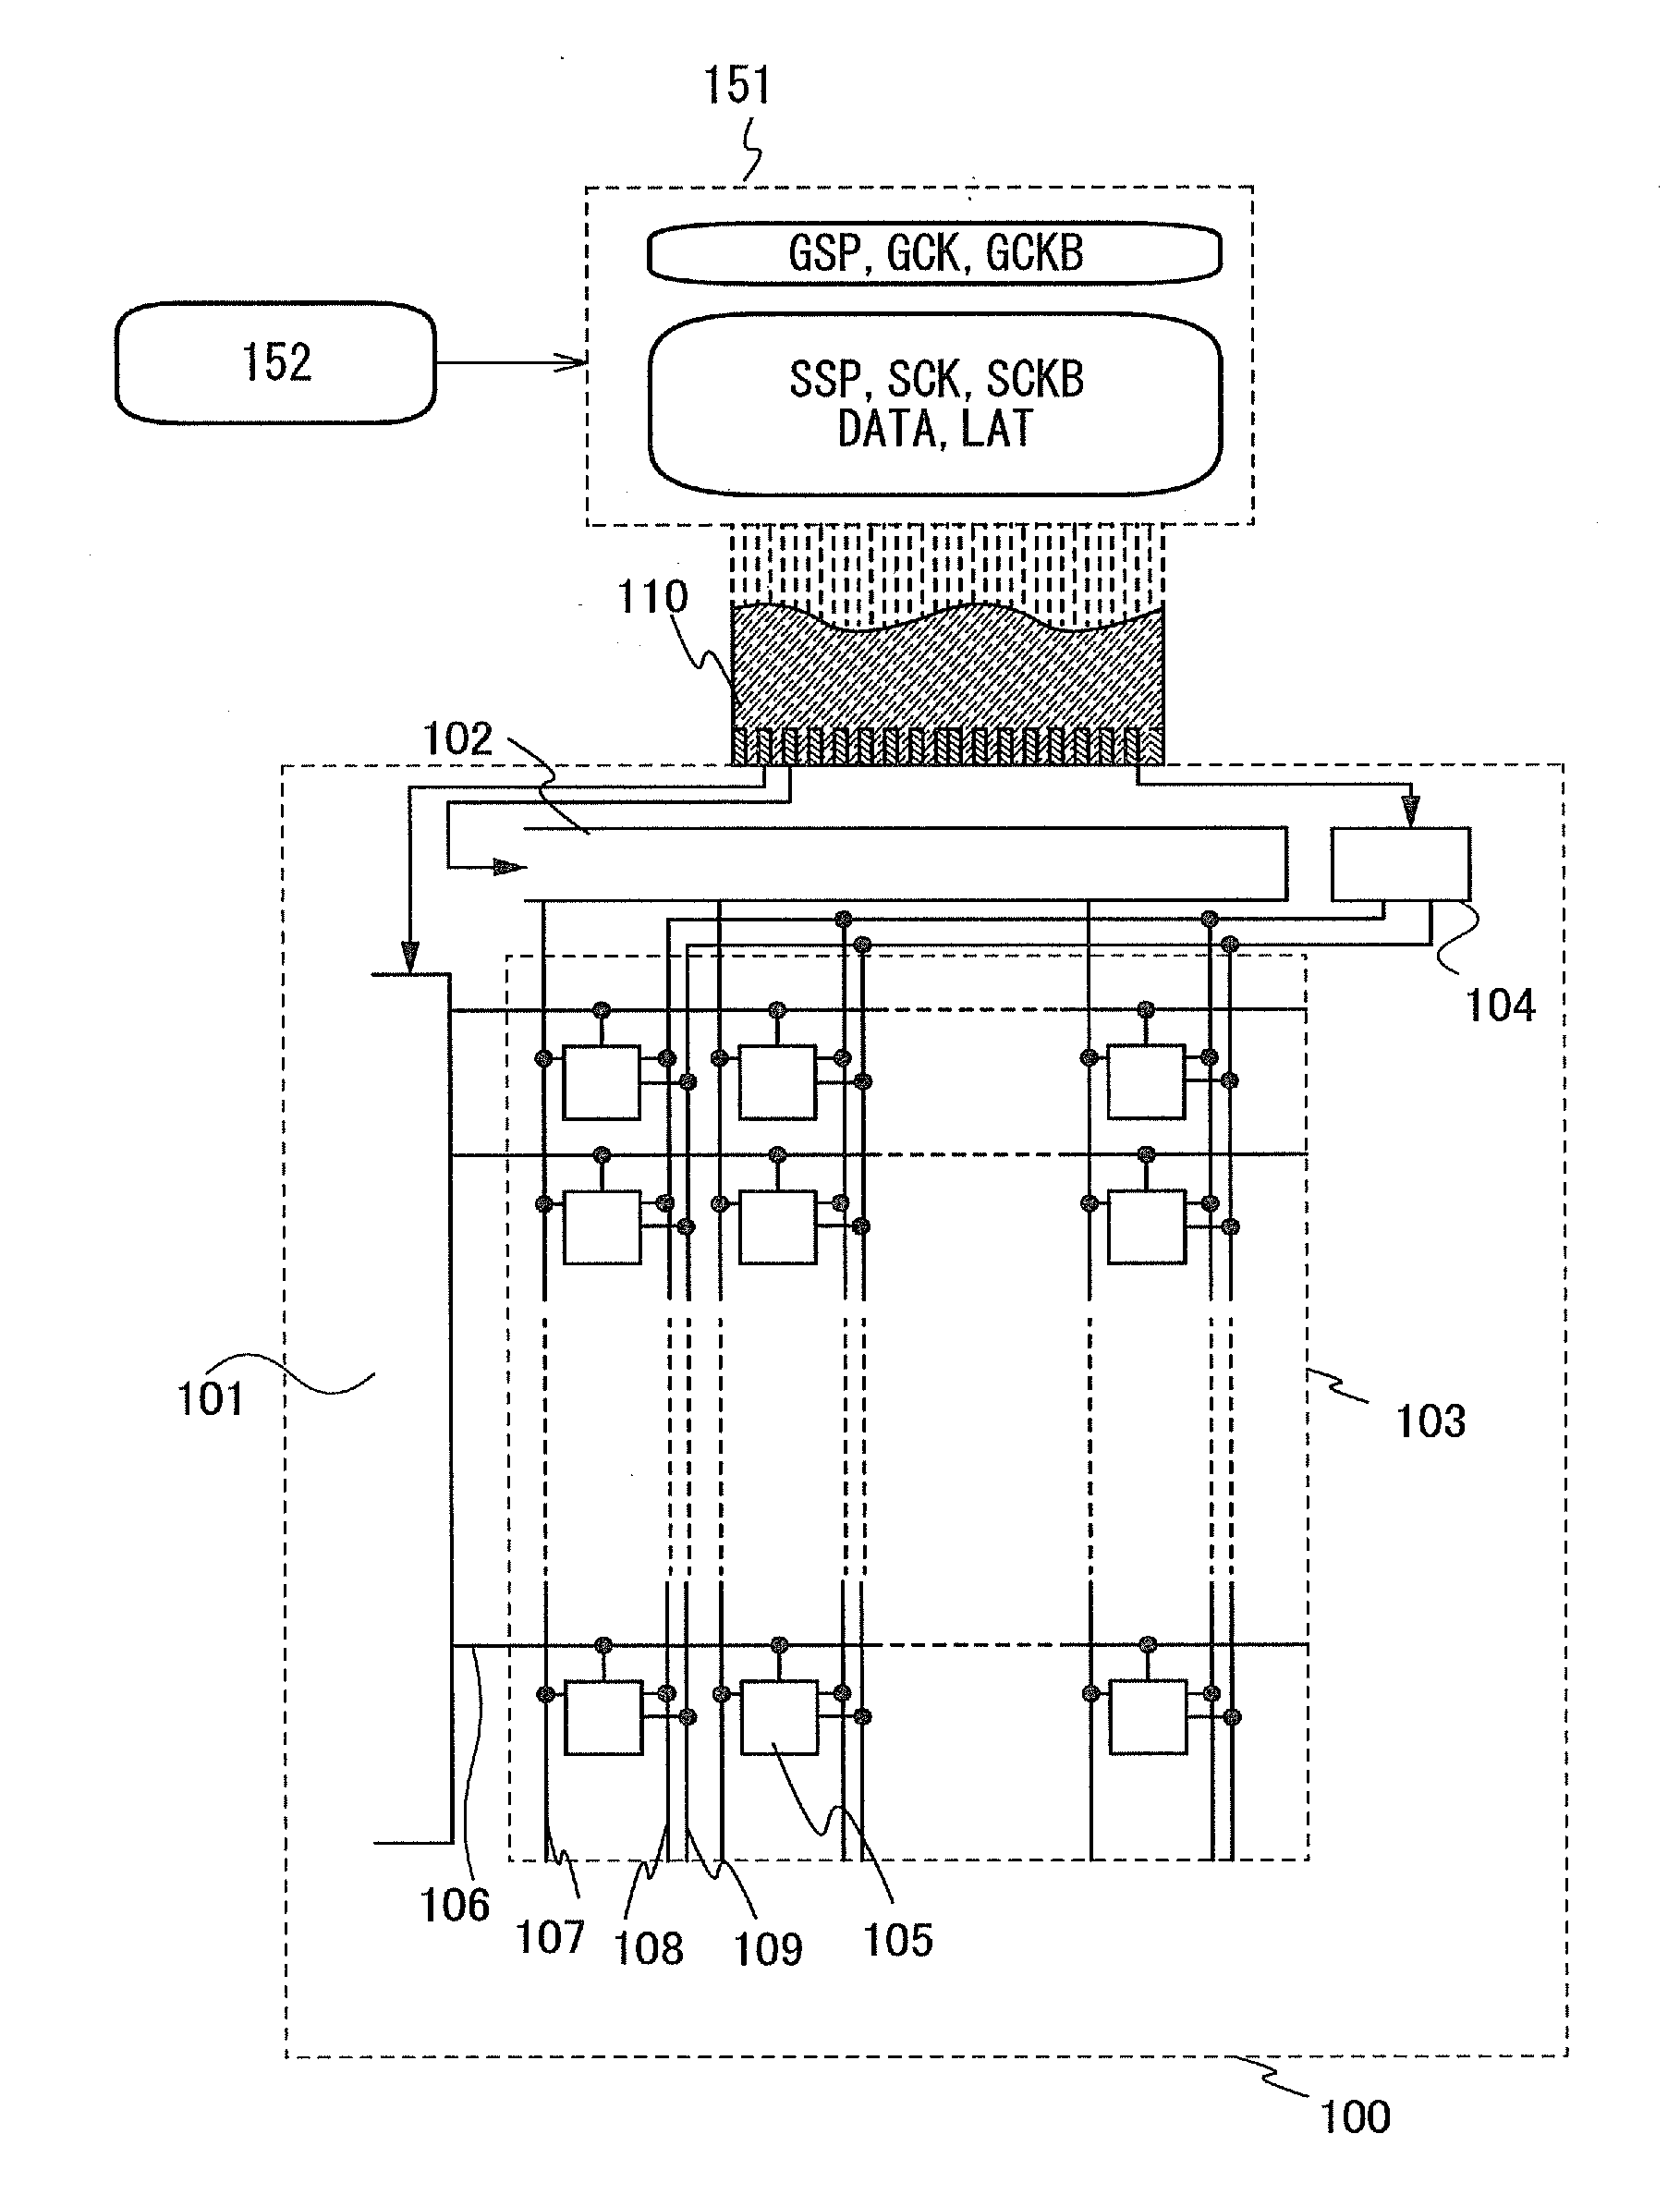 Display device, method for driving the same, and electronic device using the display device and the method